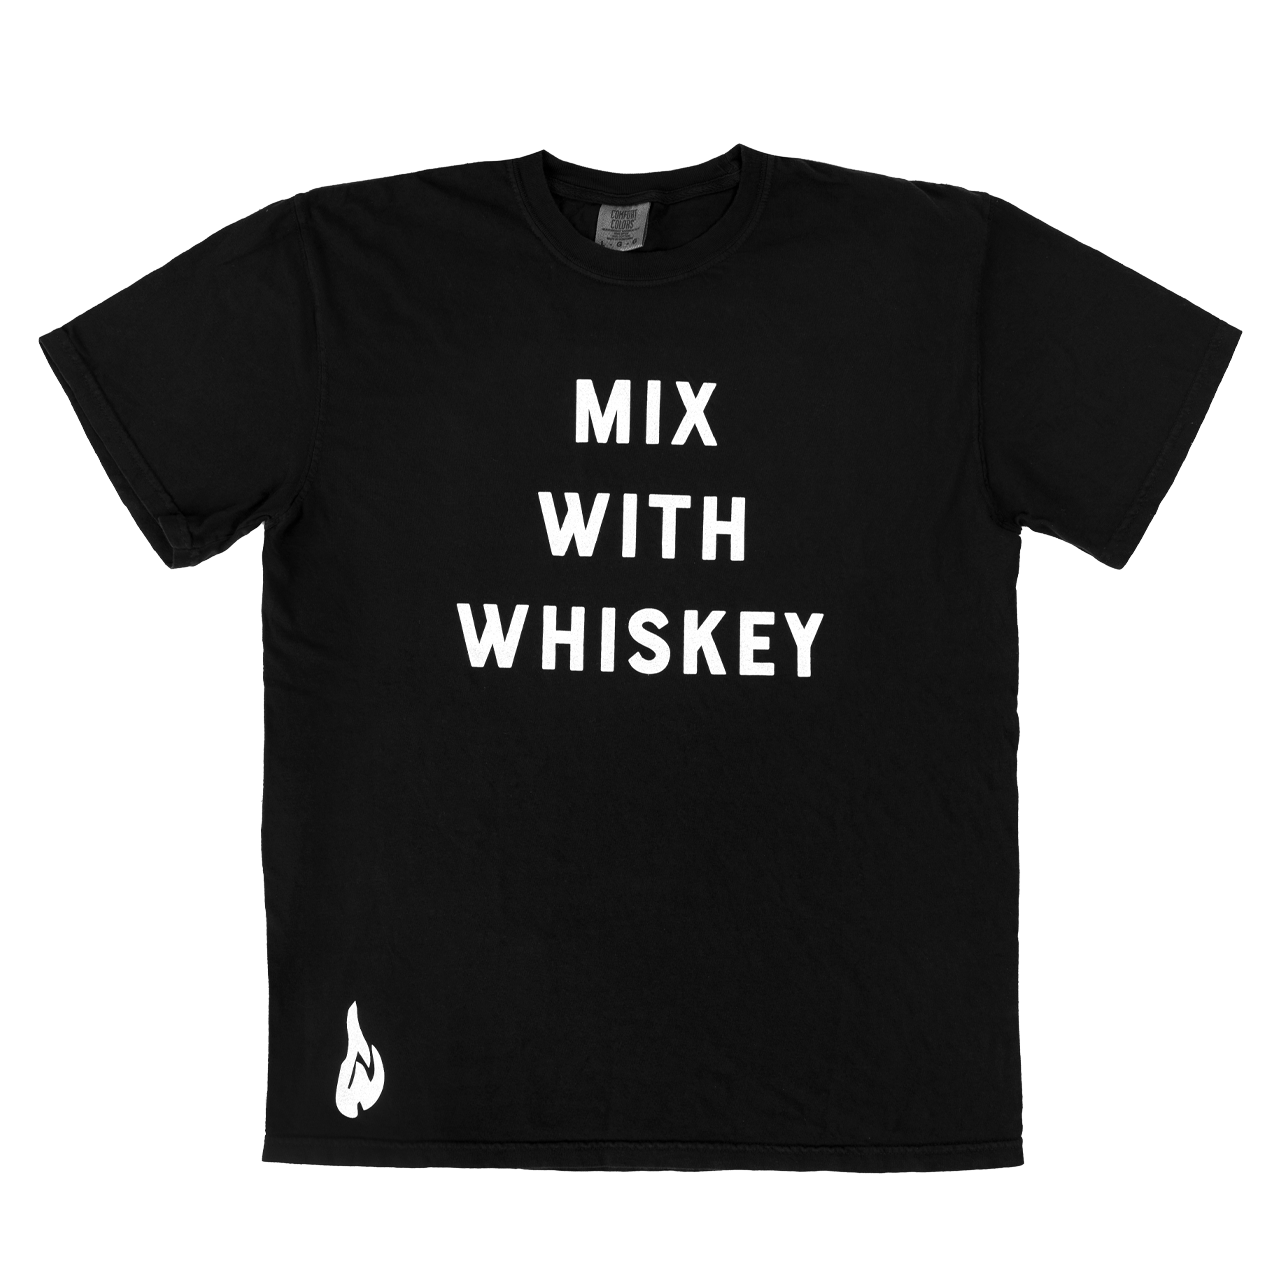 Mix With Whiskey Tee